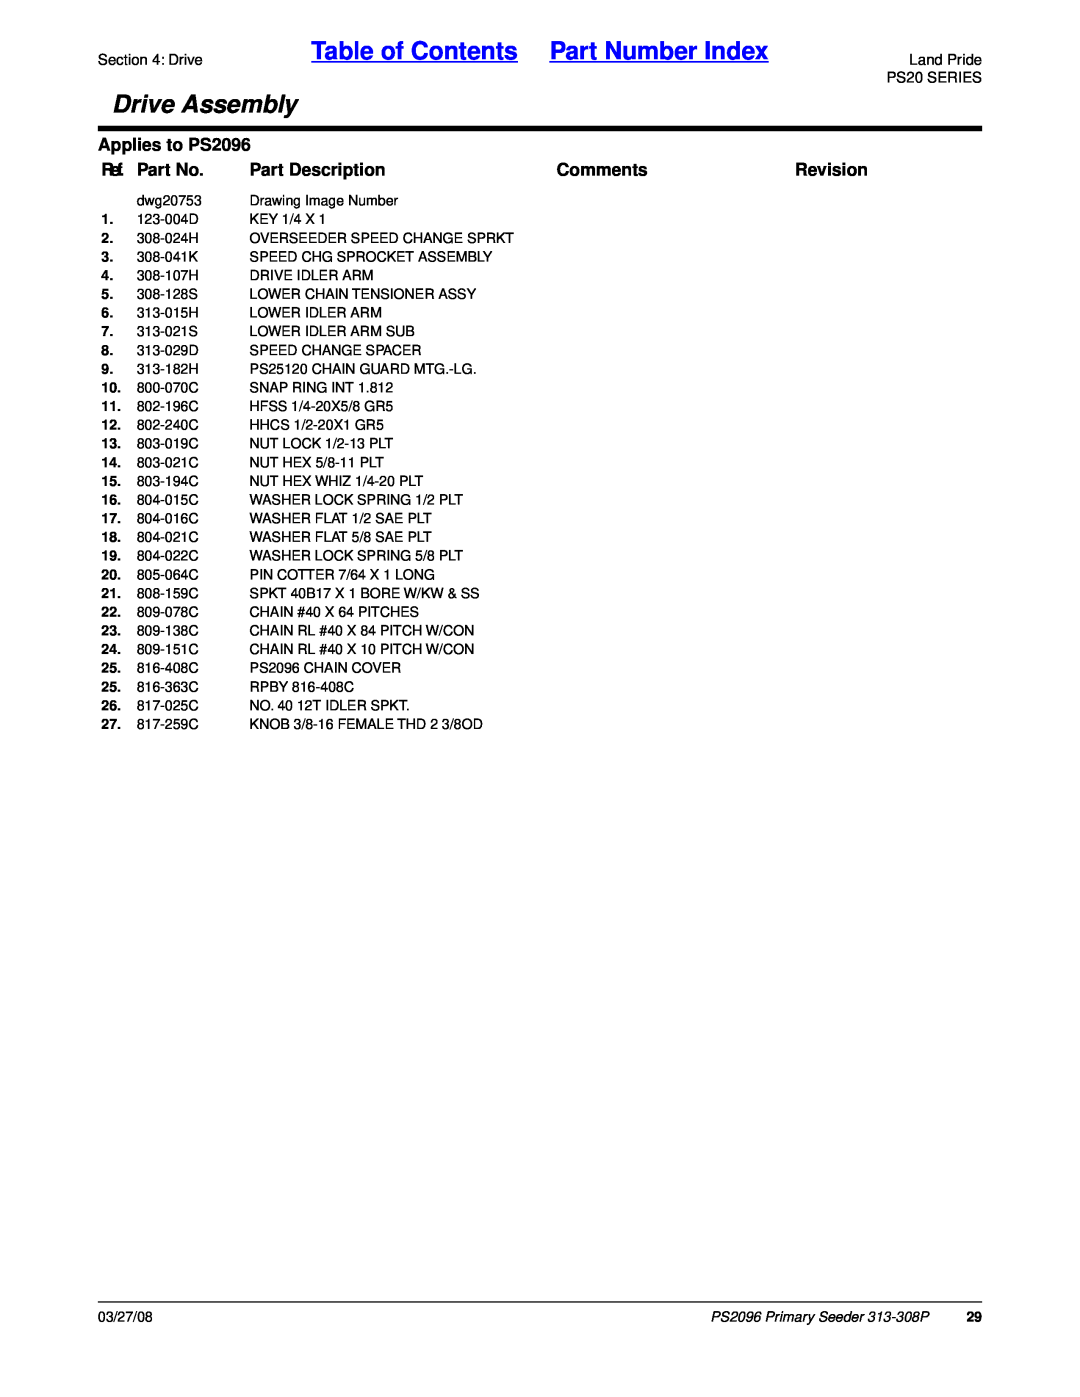 Land Pride manual Table of Contents Part Number Index, Drive Assembly, Applies to PS2096, Ref. Part No, Part Description 